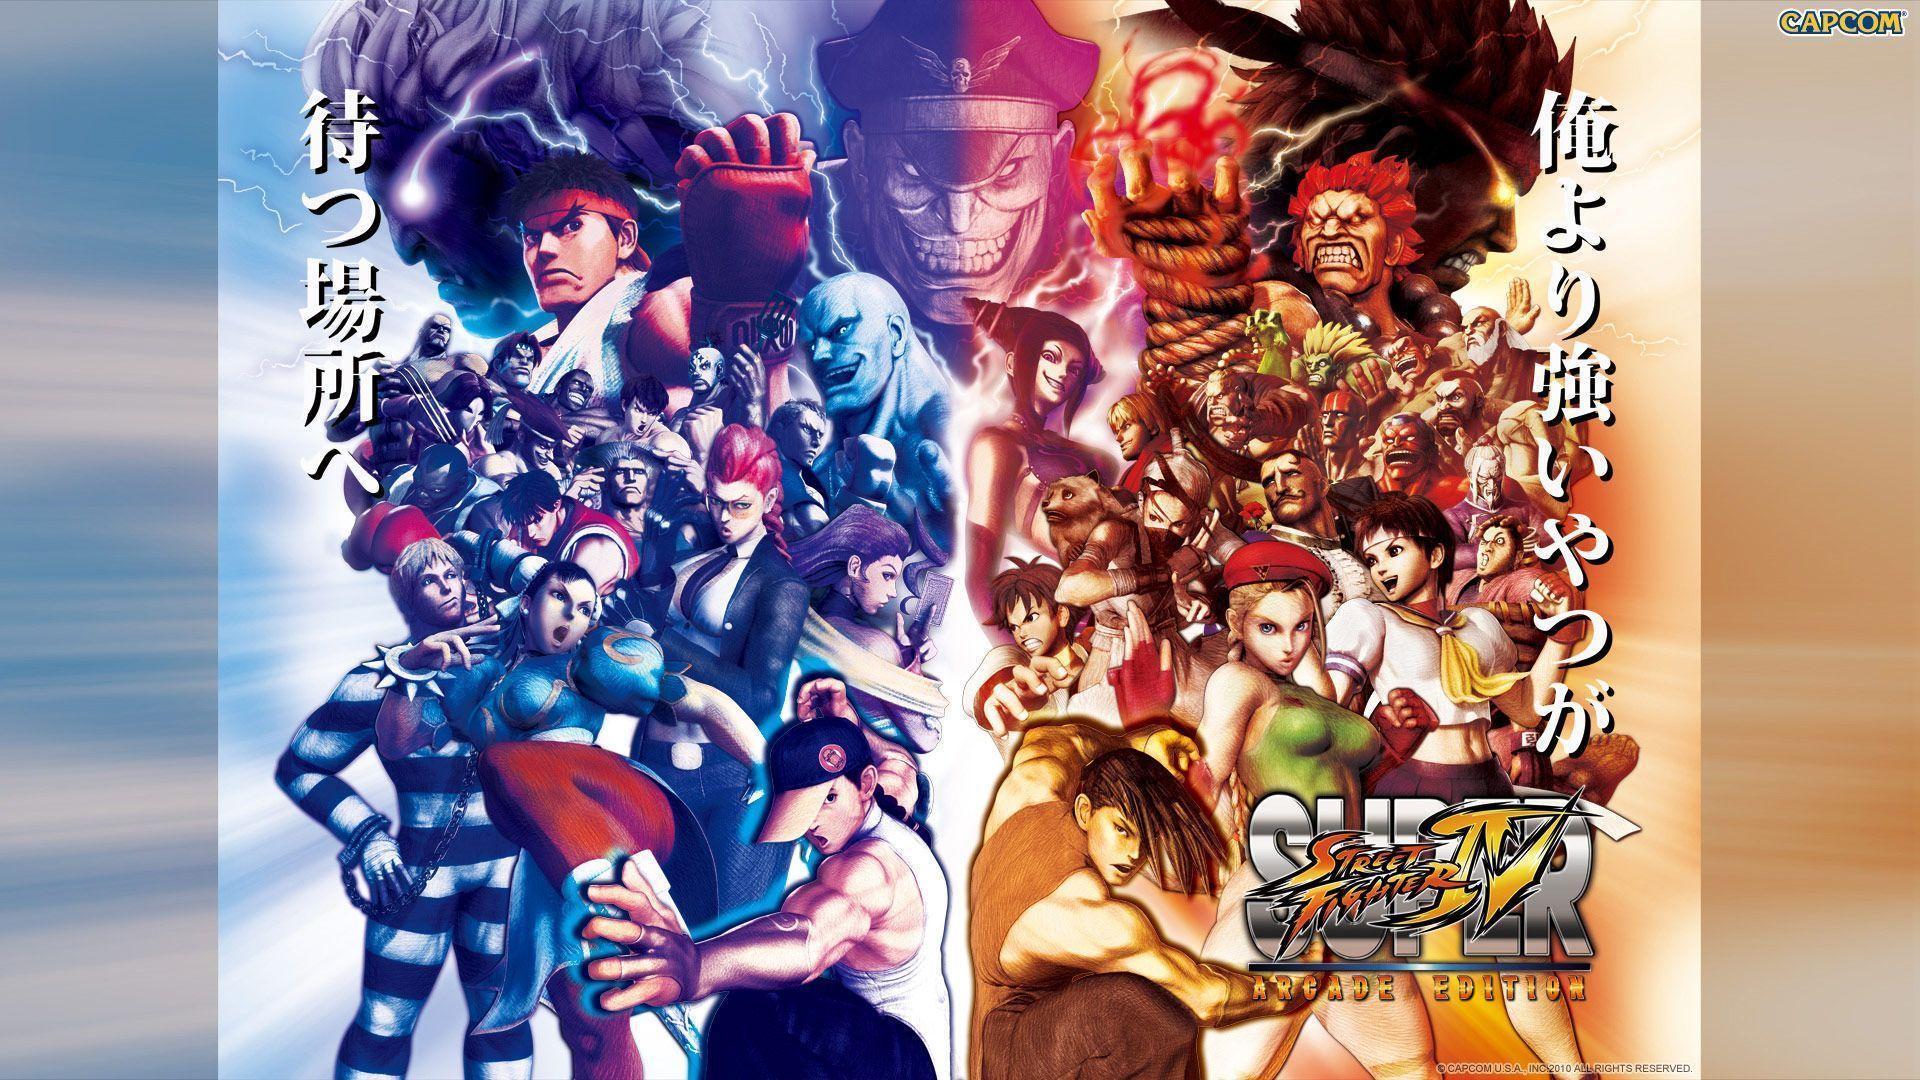 Super Street Fighter 4 Arcade Edition wallpaper with Oni and Evil Ryu